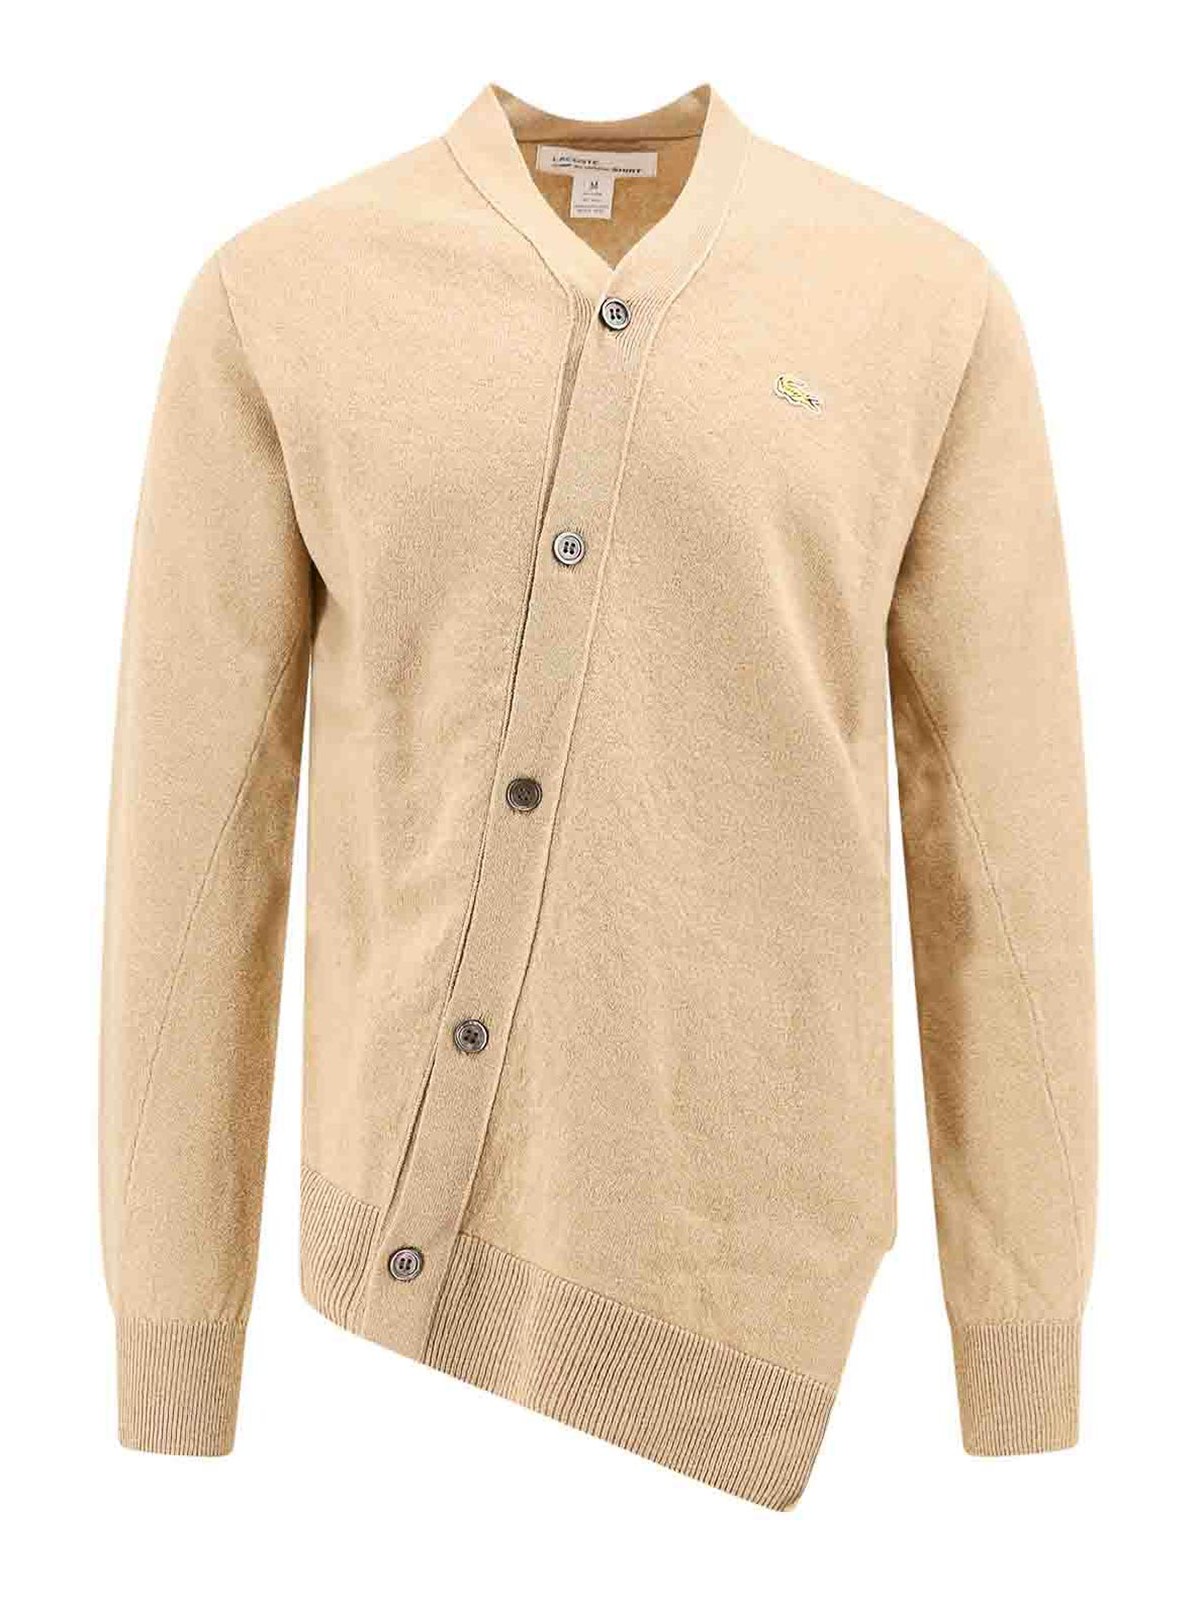 Comme Des Garçons Shirt Wool Cardigan With Frontal Lacoste Patch In Beige